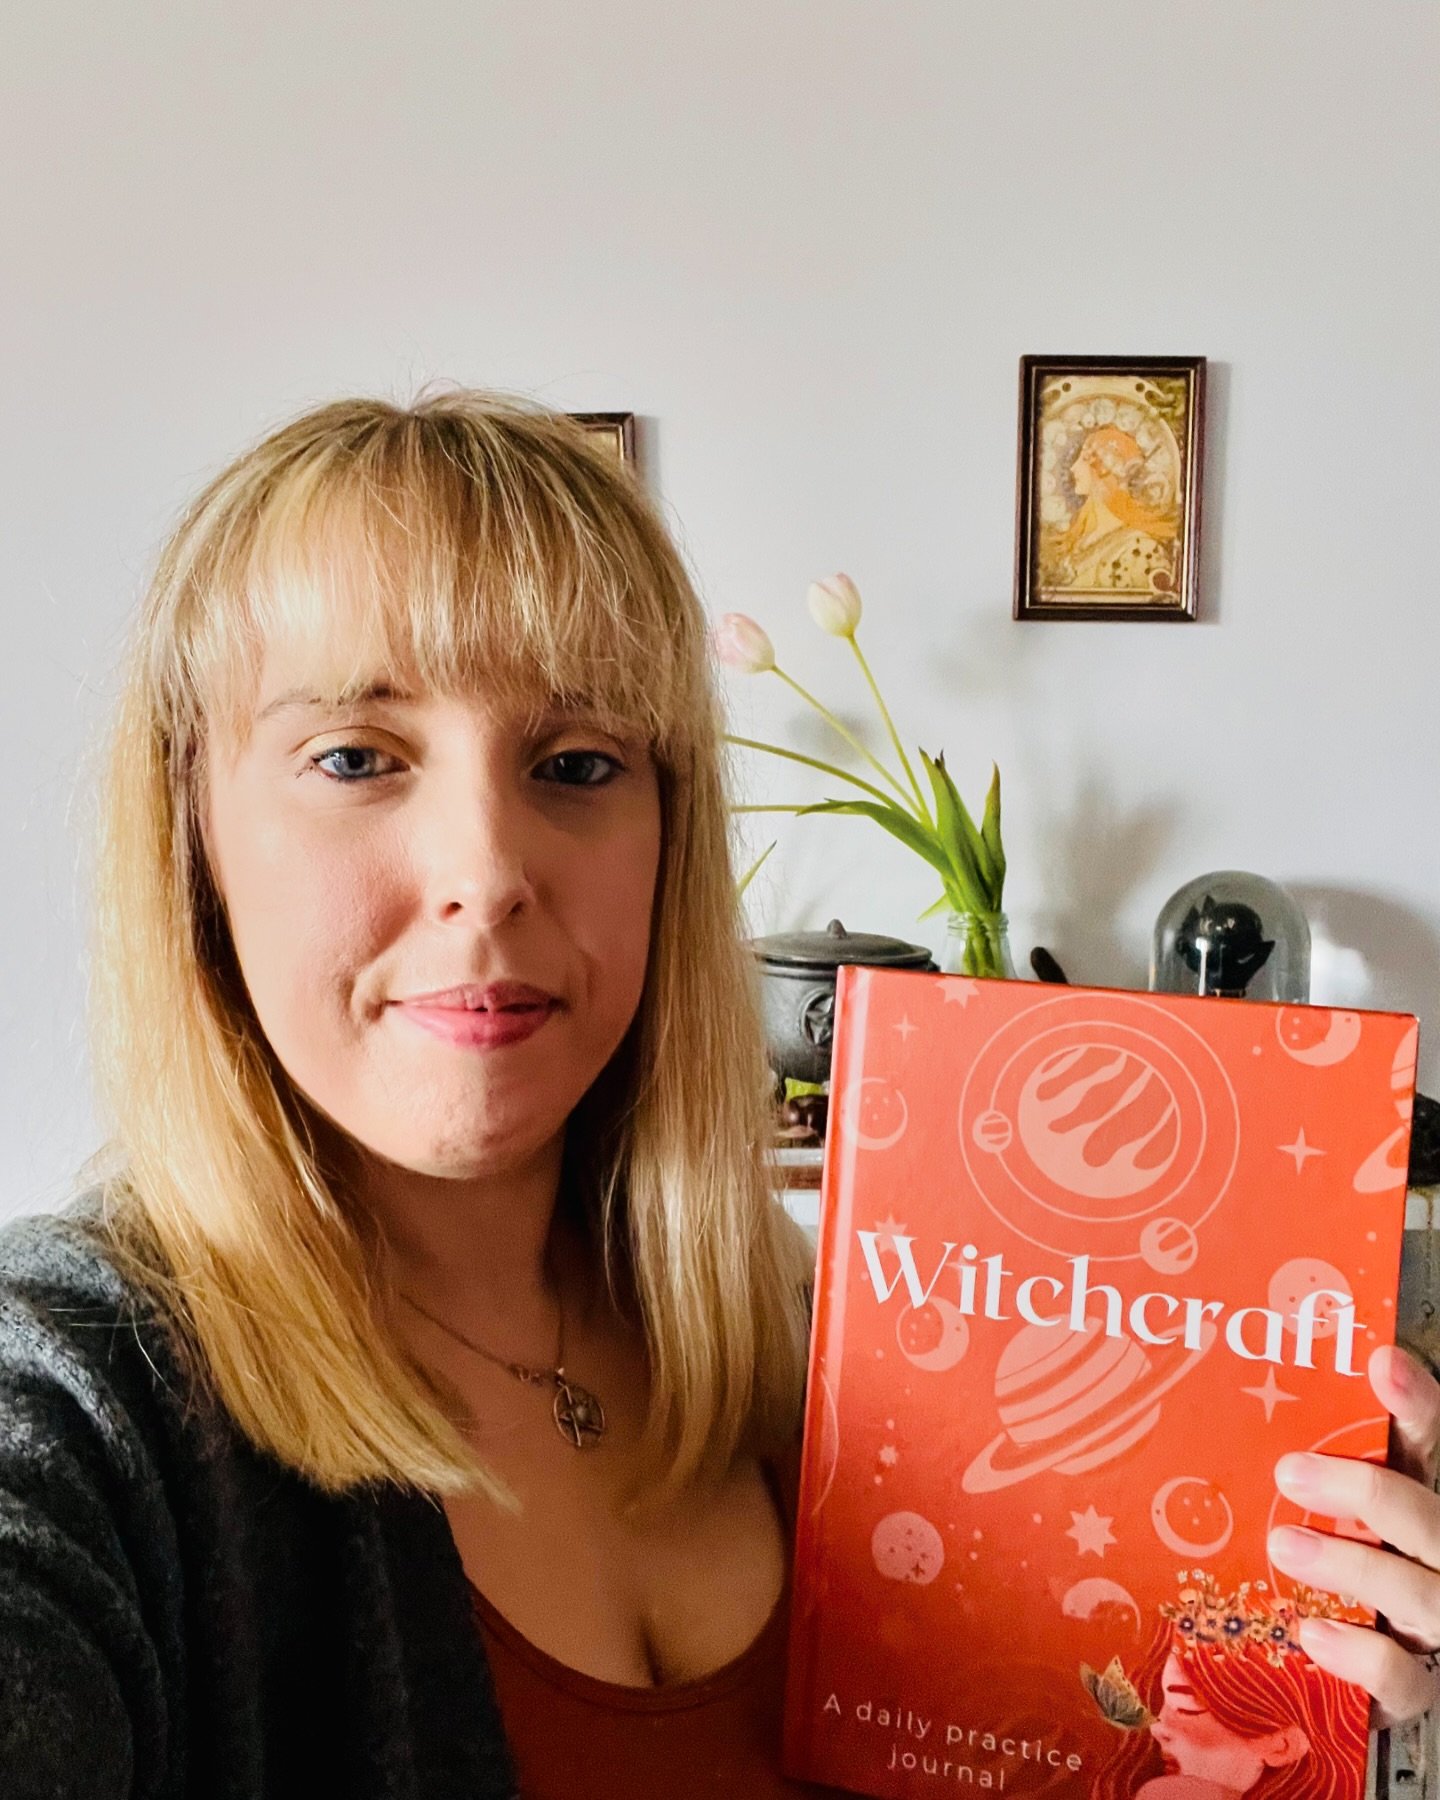 🌙Great news!🌙

You can now order Witchcraft: A daily practice journal from my website, if you&rsquo;re not an Amazon fan. 

www.natalieroberts.net/shop. Link also in bio!

Only paperbacks available right now.

#witchcraftbook #witchaesthetic #pagan